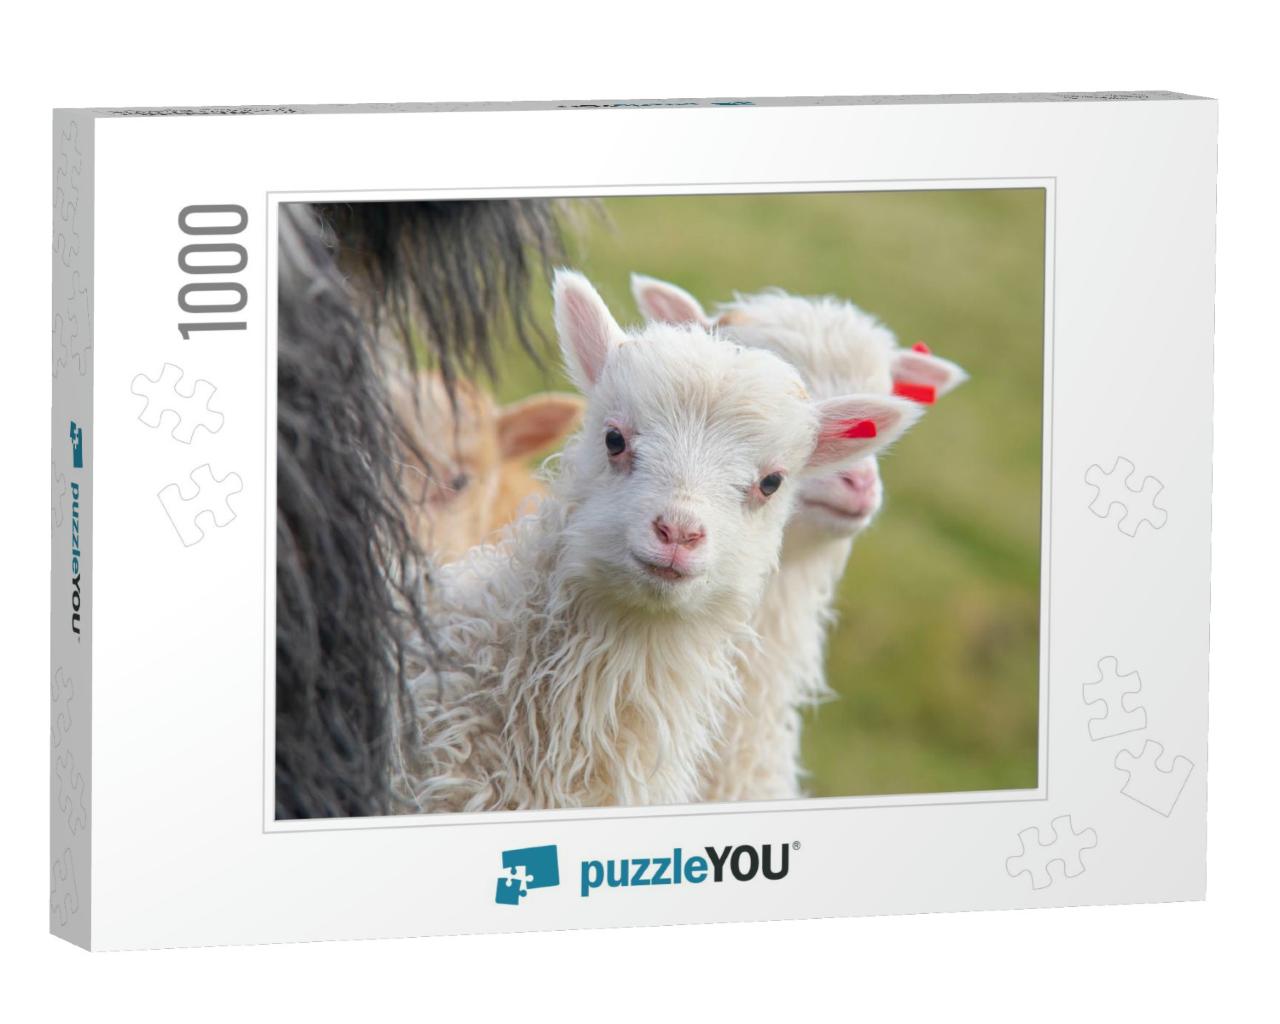 Faroe Islands Animals, Sheep & Lambs... Jigsaw Puzzle with 1000 pieces